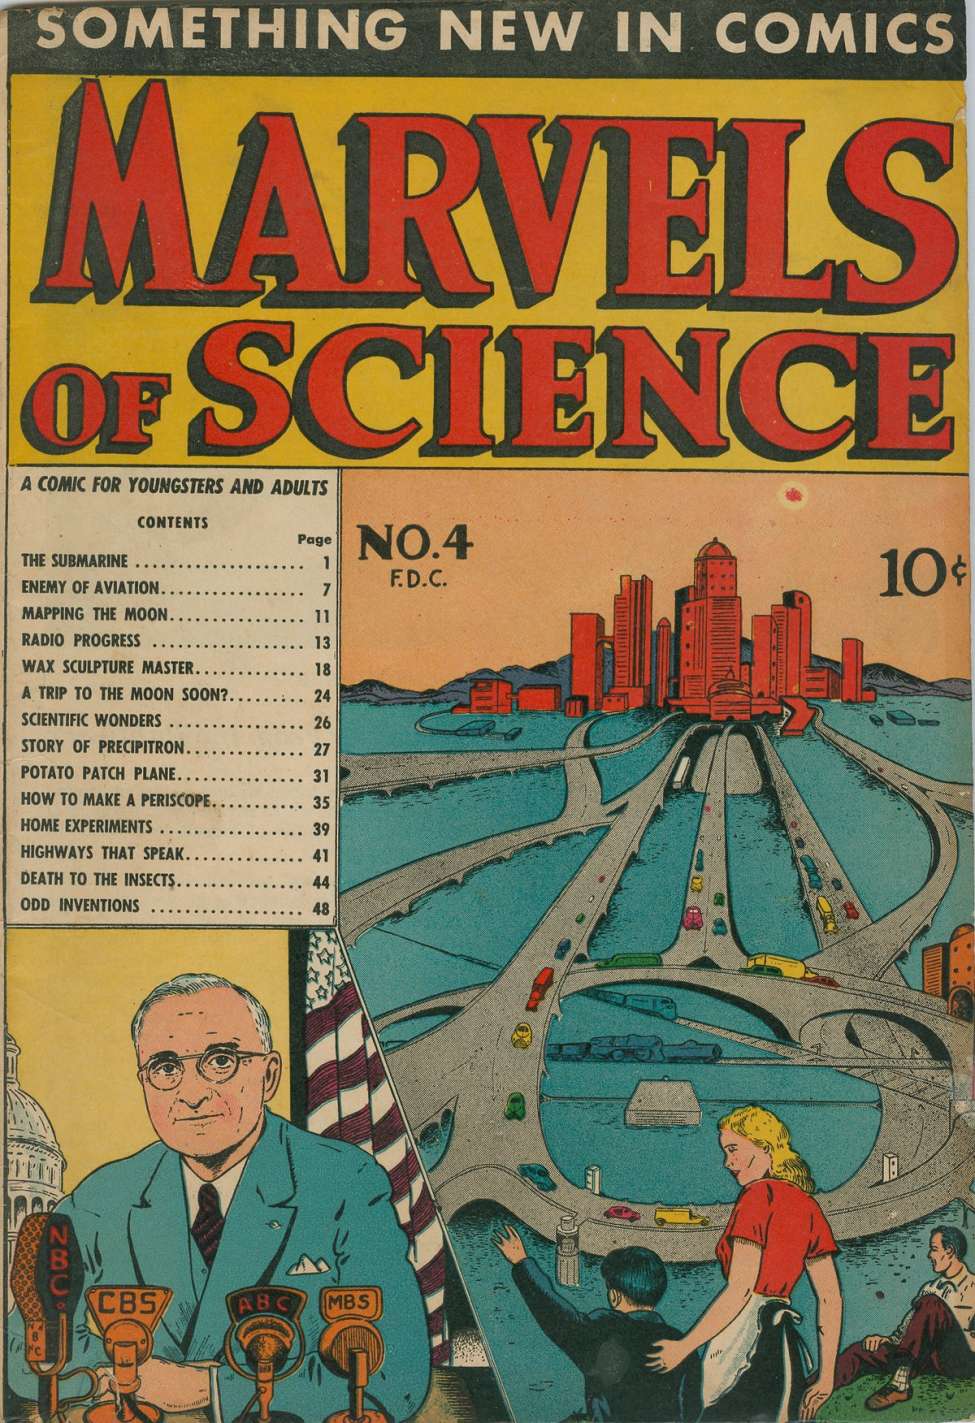 Book Cover For Marvels of Science 4